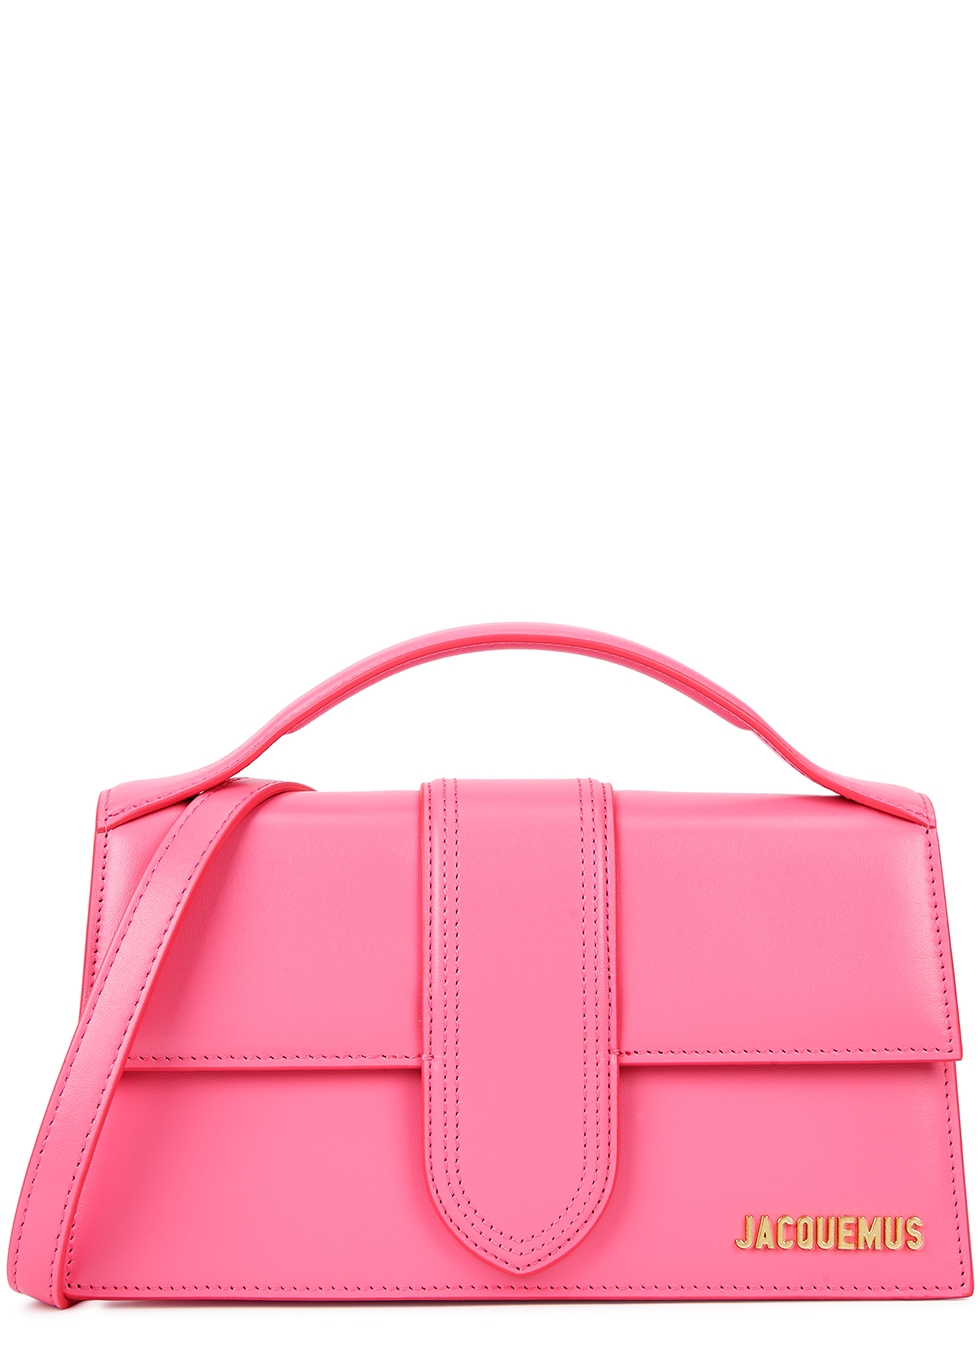 Jacquemus Le Grande Bambino pink leather top handle bag